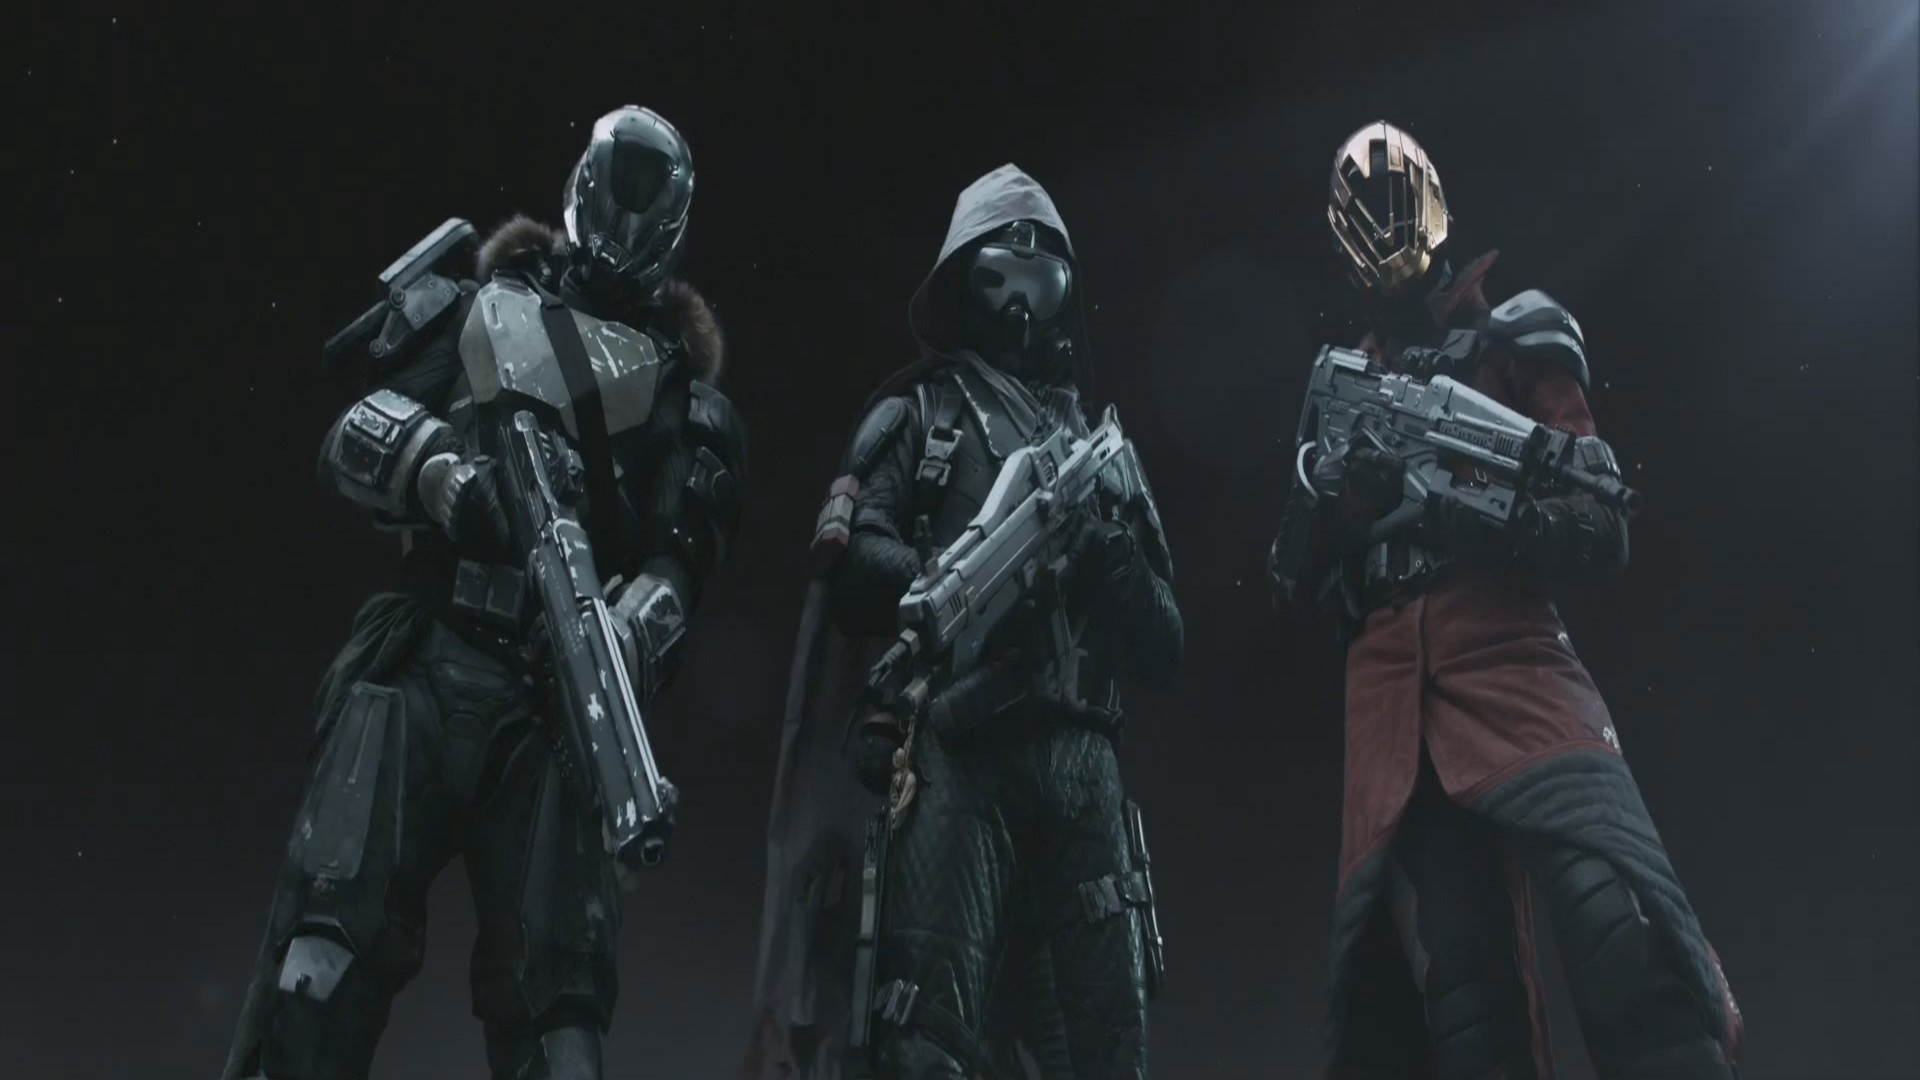 1920x1080 Check Out Destiny's 'Trials of Osiris' Reveal Archive